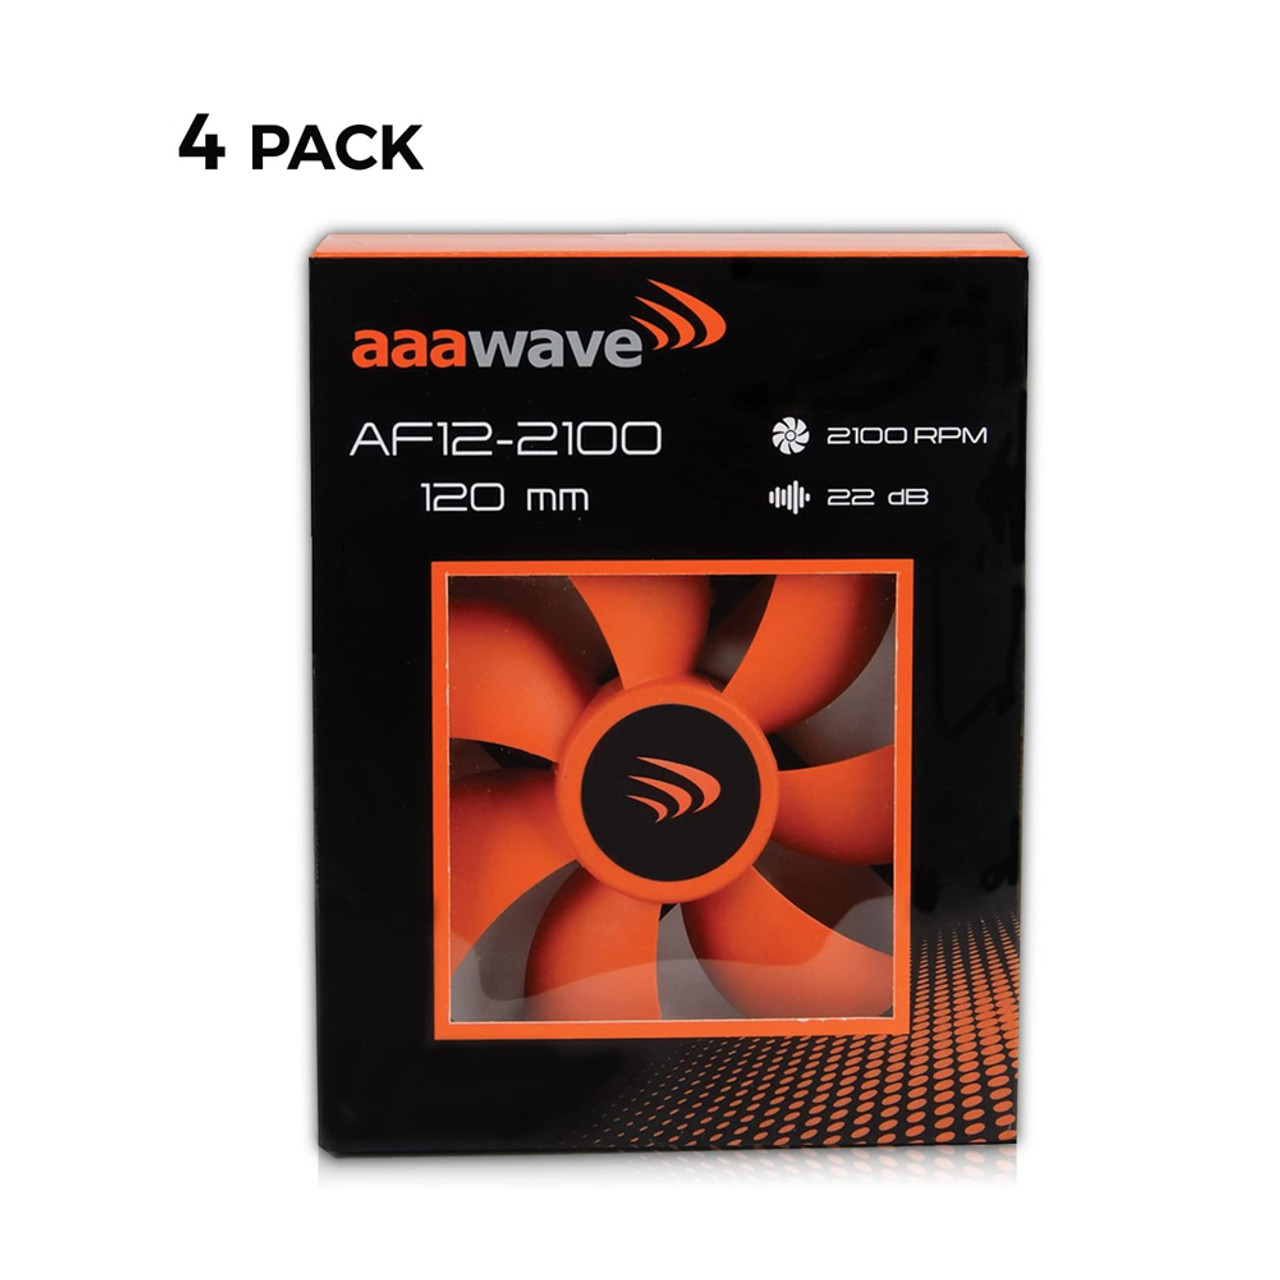 Special bundle AAAwave - The Sluice Aluminum mining case 6 GPU + Set of 4 - AAAwave 120mm Double ball bearing Silent Cooling Fan